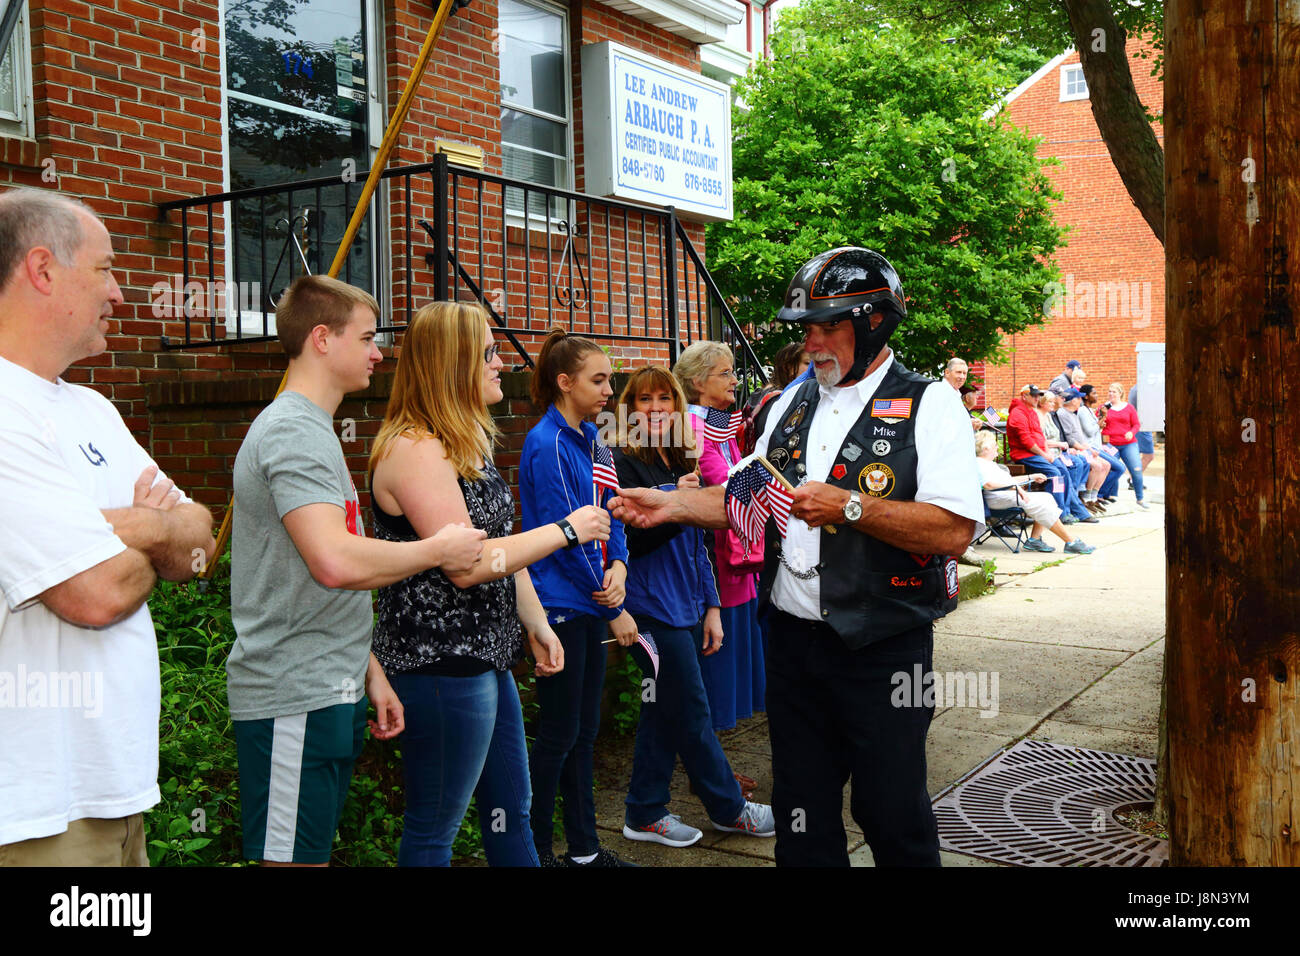 Westminster, Maryland, USA. 29th May, 2017. A former Navy serviceman hands out American flags to spectators at the start of parades for Memorial Day, a federal holiday in the United States for remembering those who died while serving in the country's armed forces. Credit: James Brunker/Alamy Live News Stock Photo